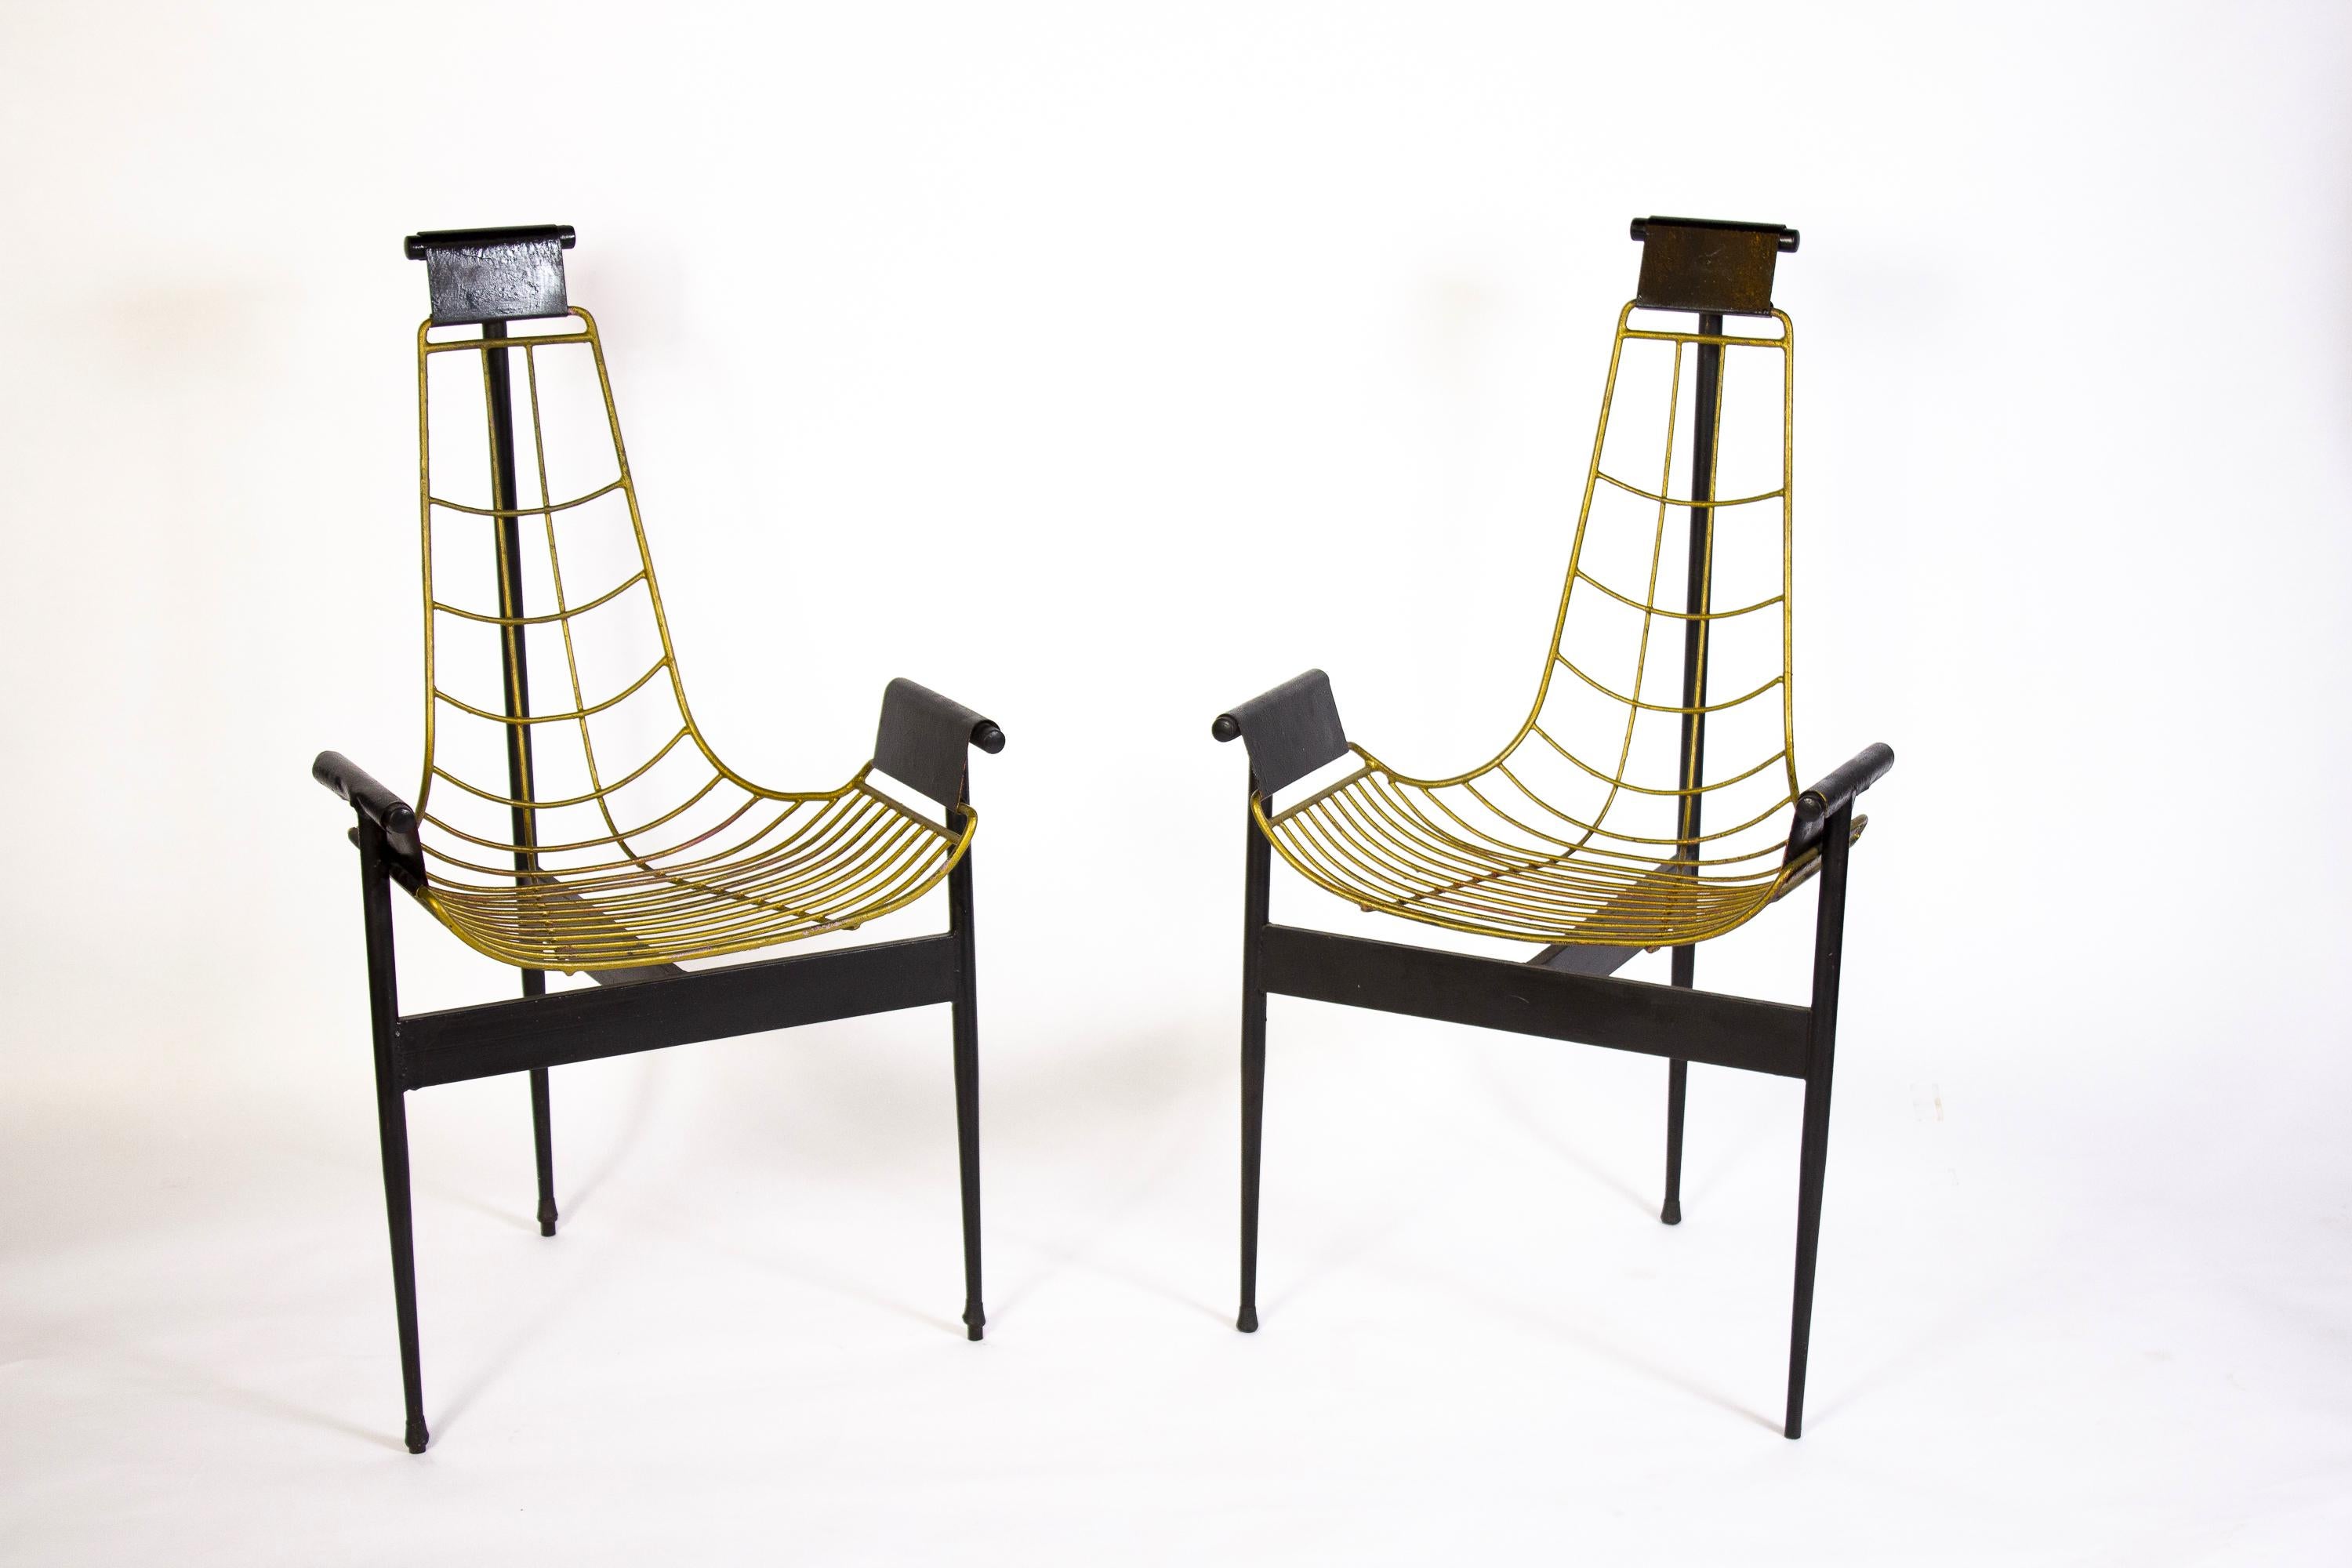 William Katavolos in partnership with Douglas Kelley & Ross Littell designed the iconic sling-back T chair in 1952 as model 3LC in Laverne International's sculptural New Furniture series. 
Frame of Black lacquered tubular steel and gold painted